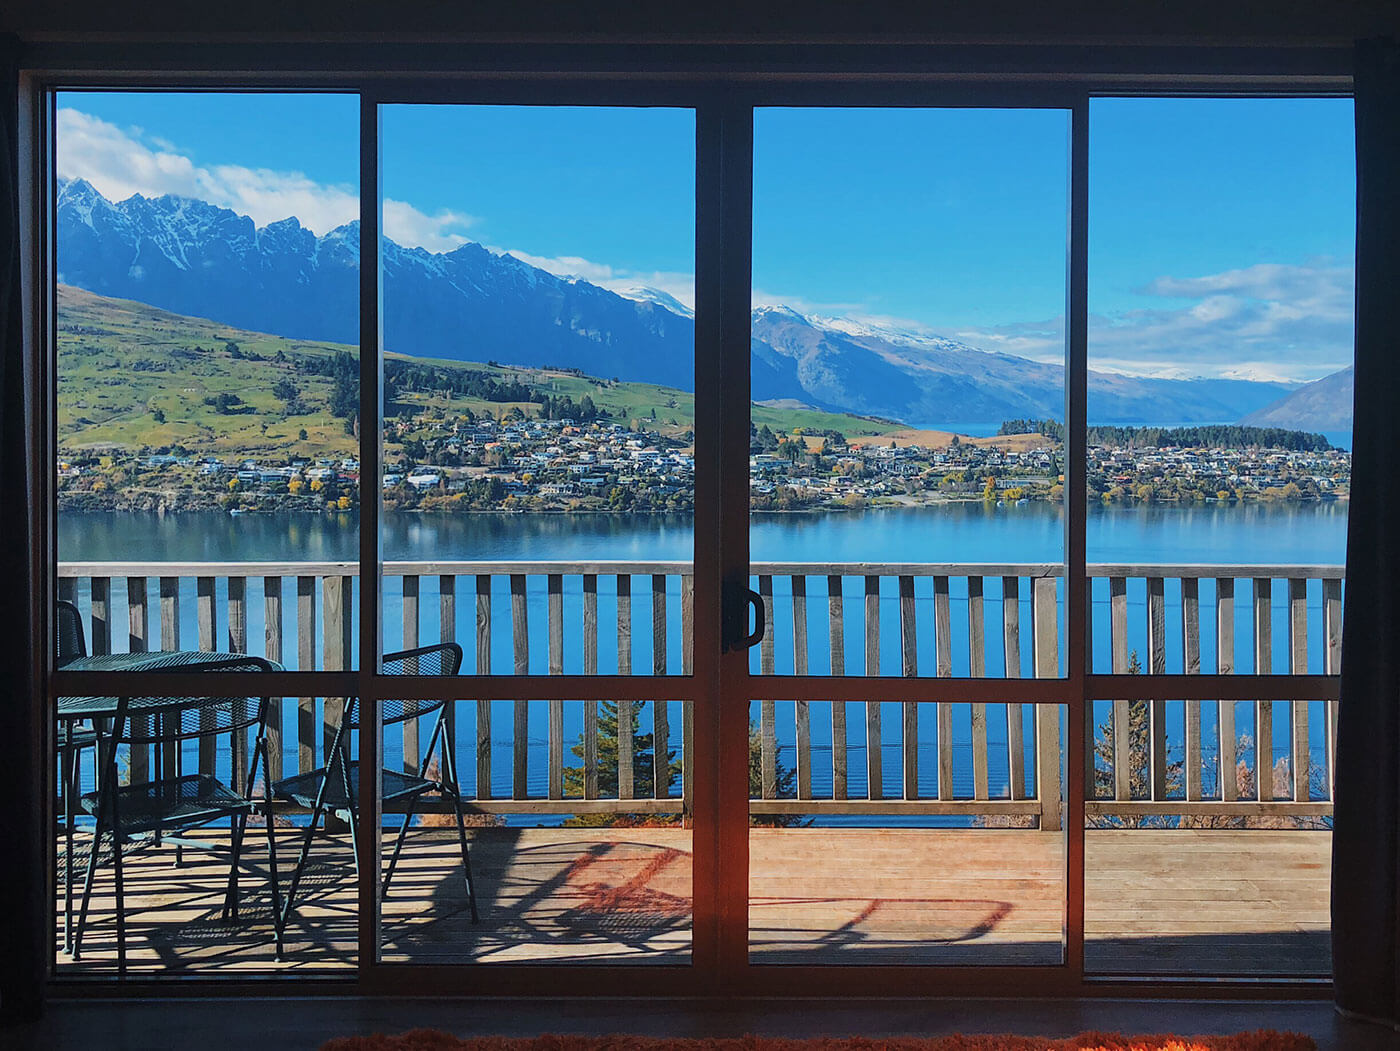 View from Airbnb in Queenstown at South Island, New Zealand - 10-Day New Zealand South Island Road Trip Itinerary